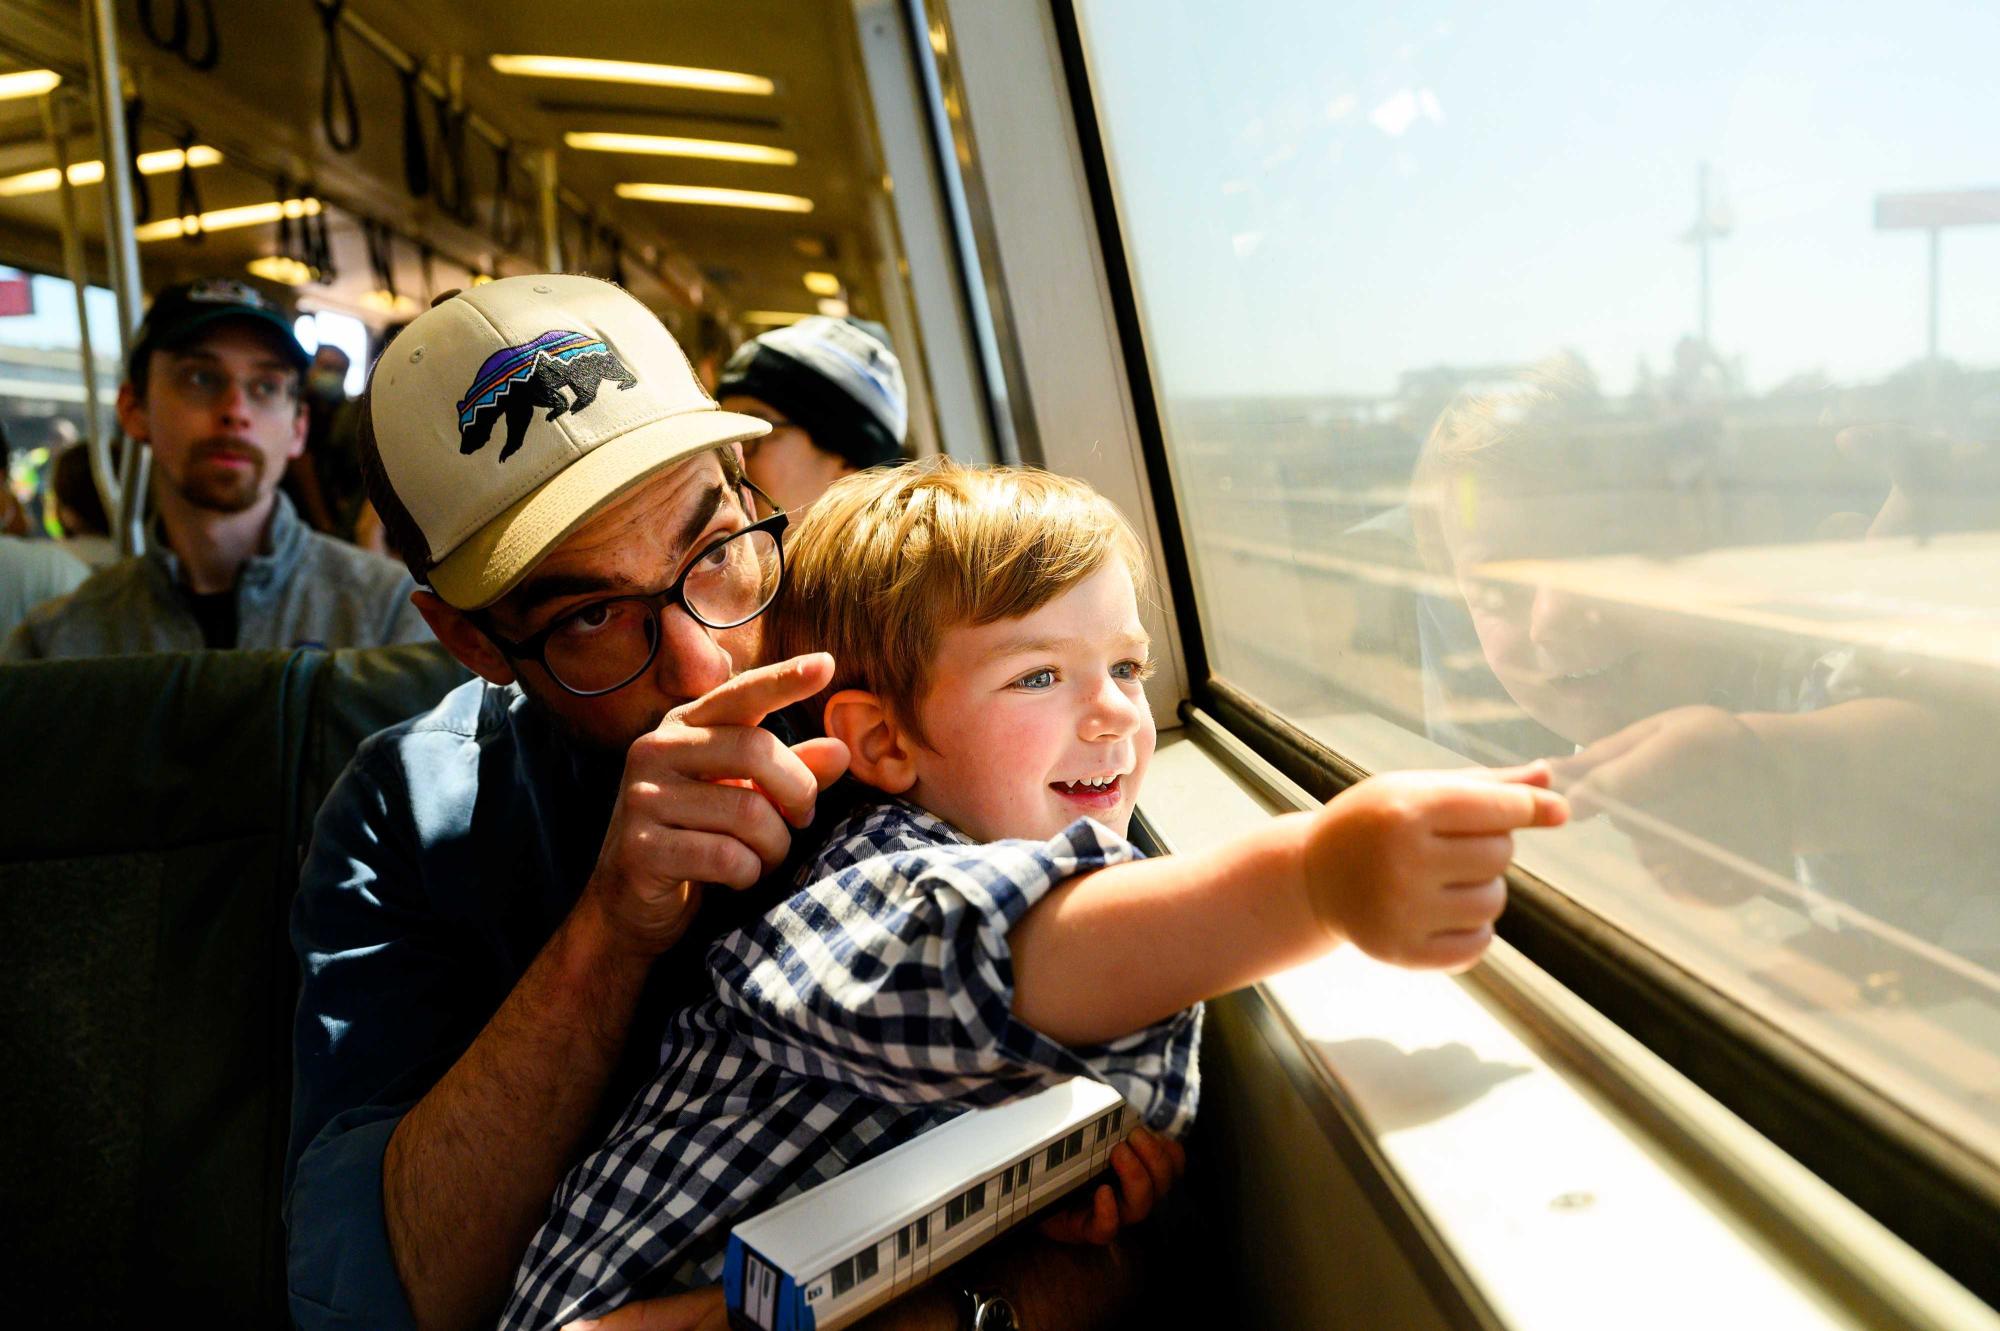 A parent and a child sitting in a BART train both point out the train window with excitement.